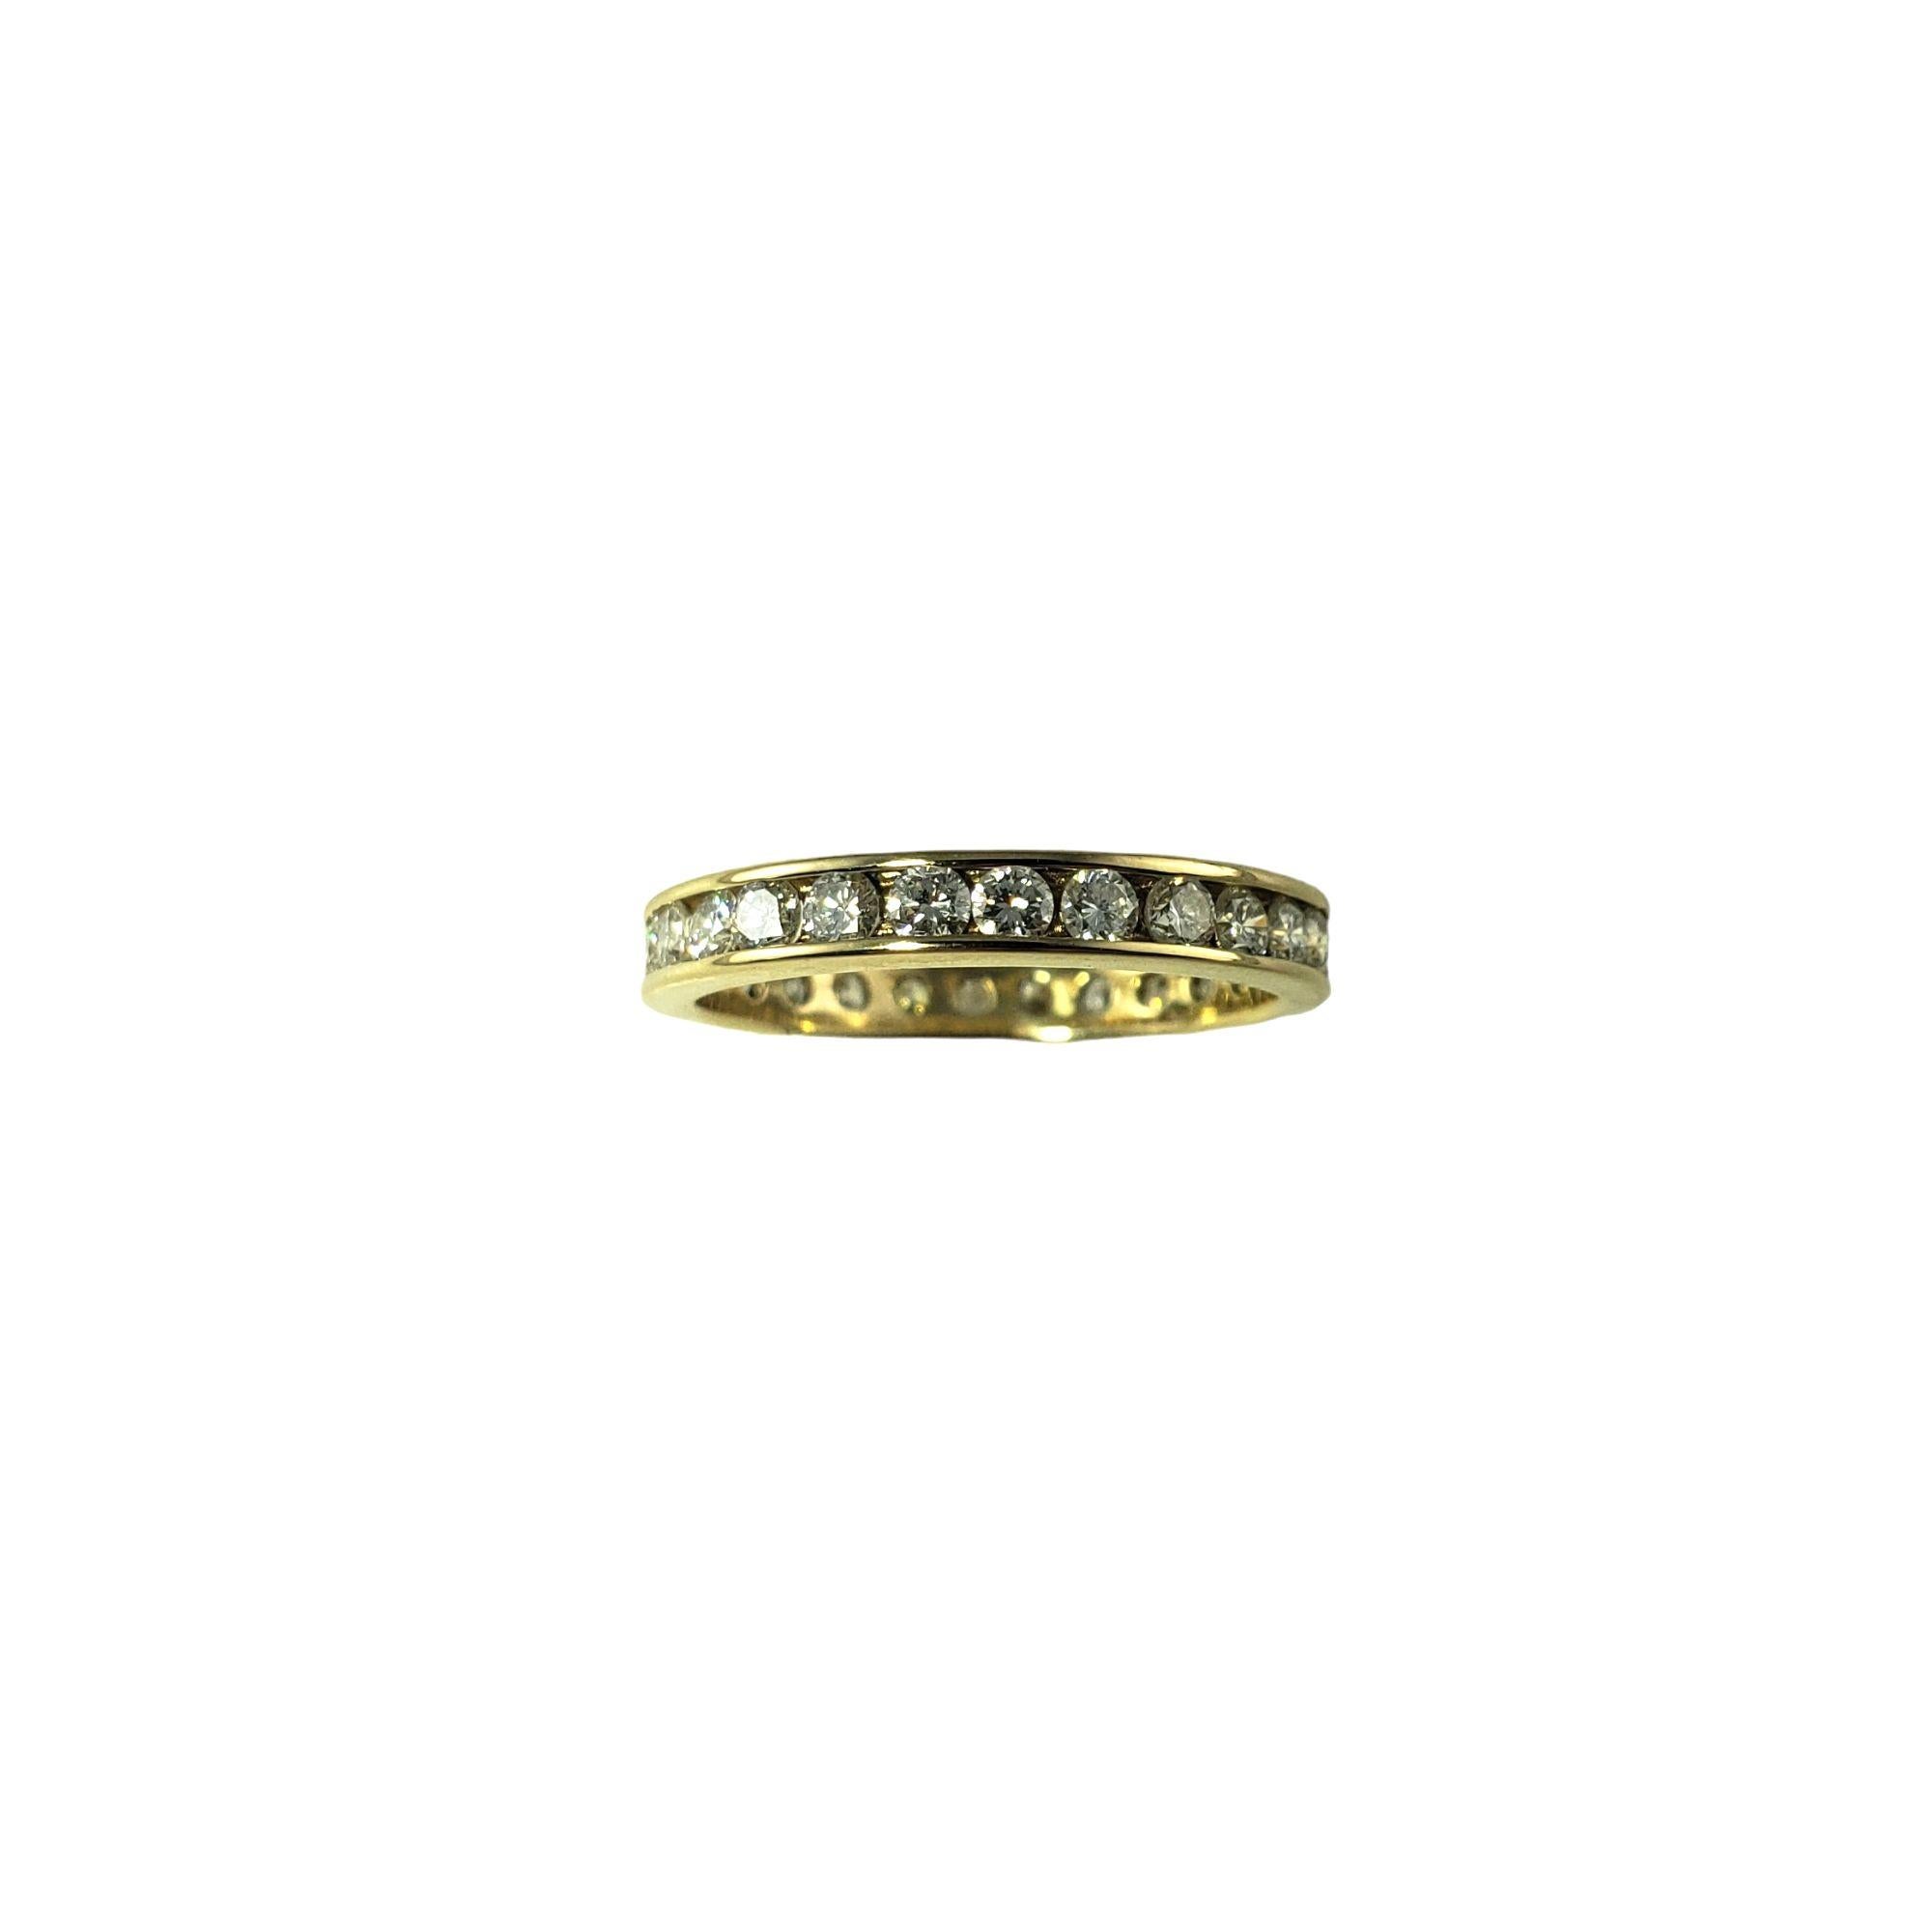 14 Karat Yellow Gold Diamond Eternity Band Ring Size 6.25 #14214 In Good Condition For Sale In Washington Depot, CT